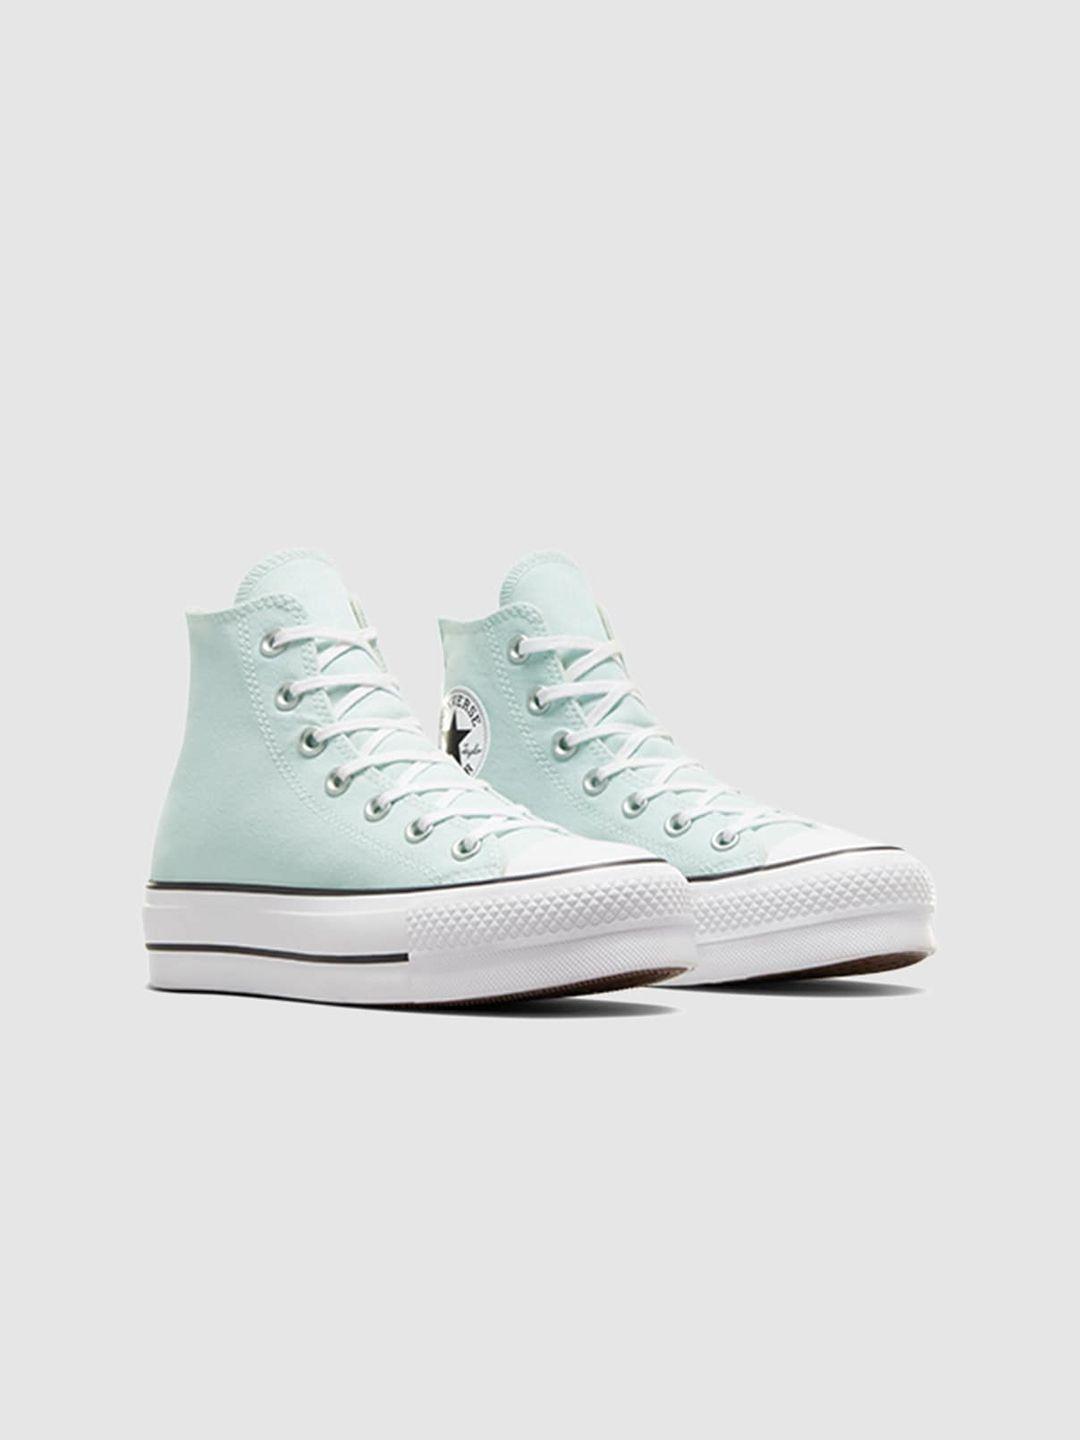 converse women round toe mid-top canvas sneakers